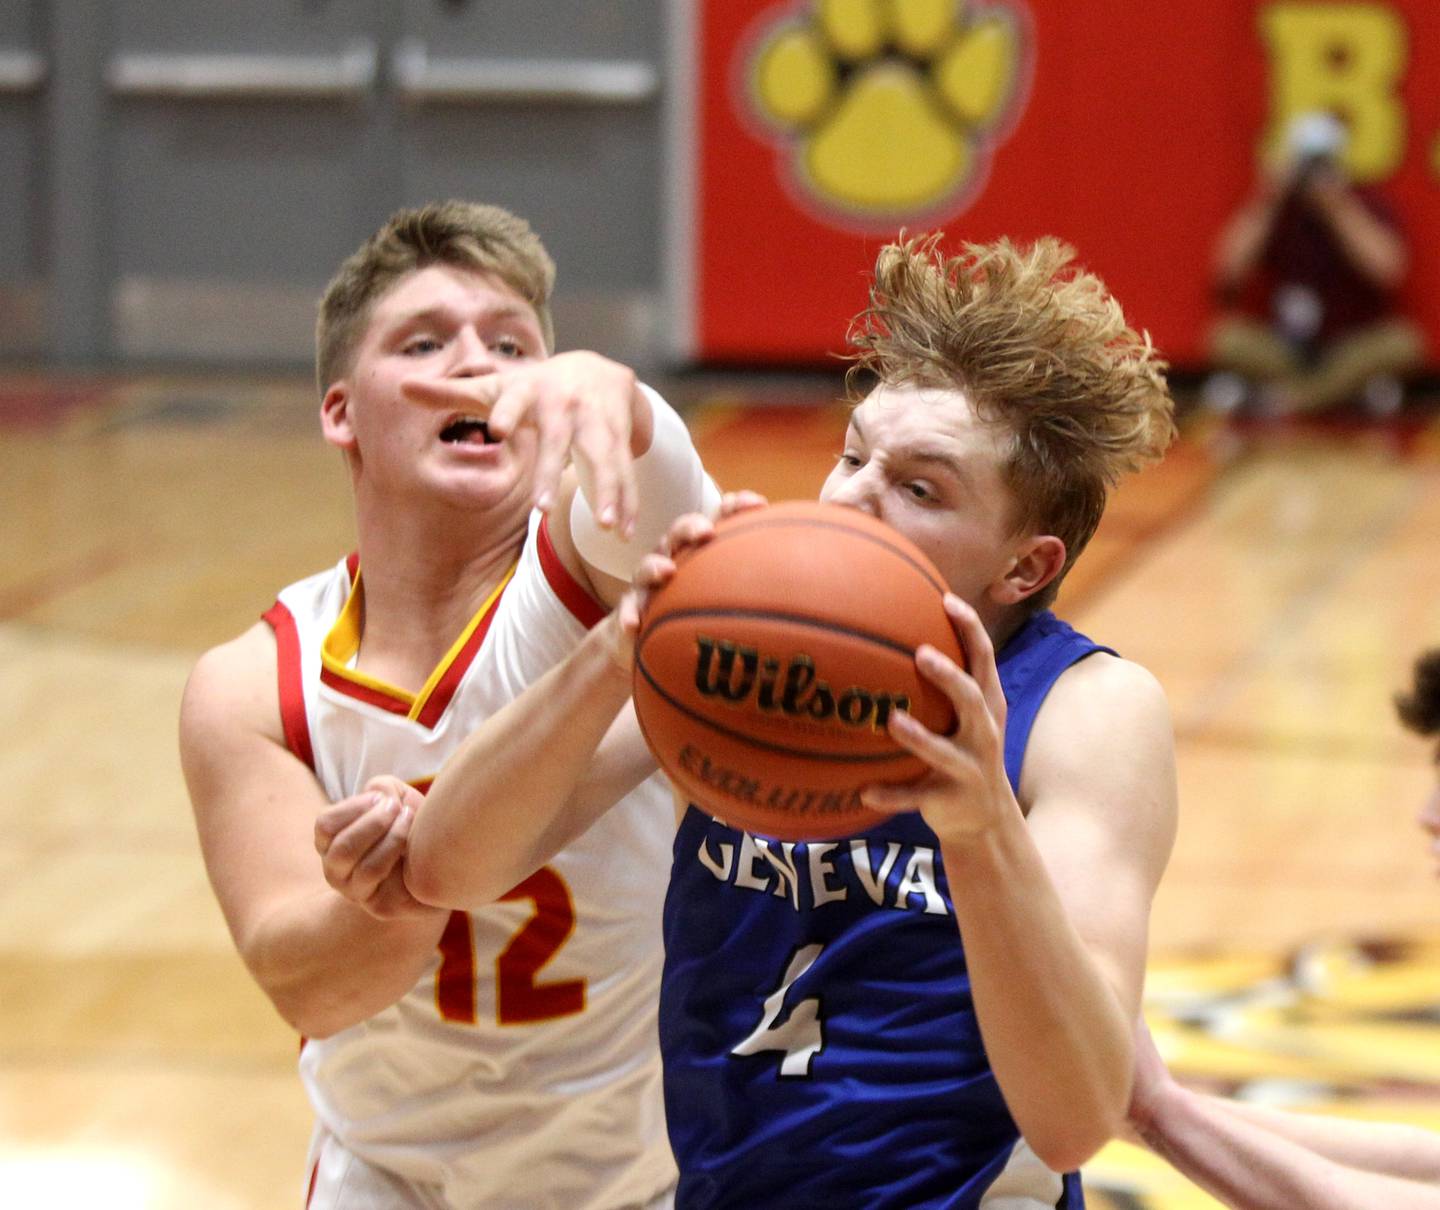 Geneva’s Tanner Dixon (right) pulls down a rebound during a game at Batavia on Friday, Dec. 16, 2022.